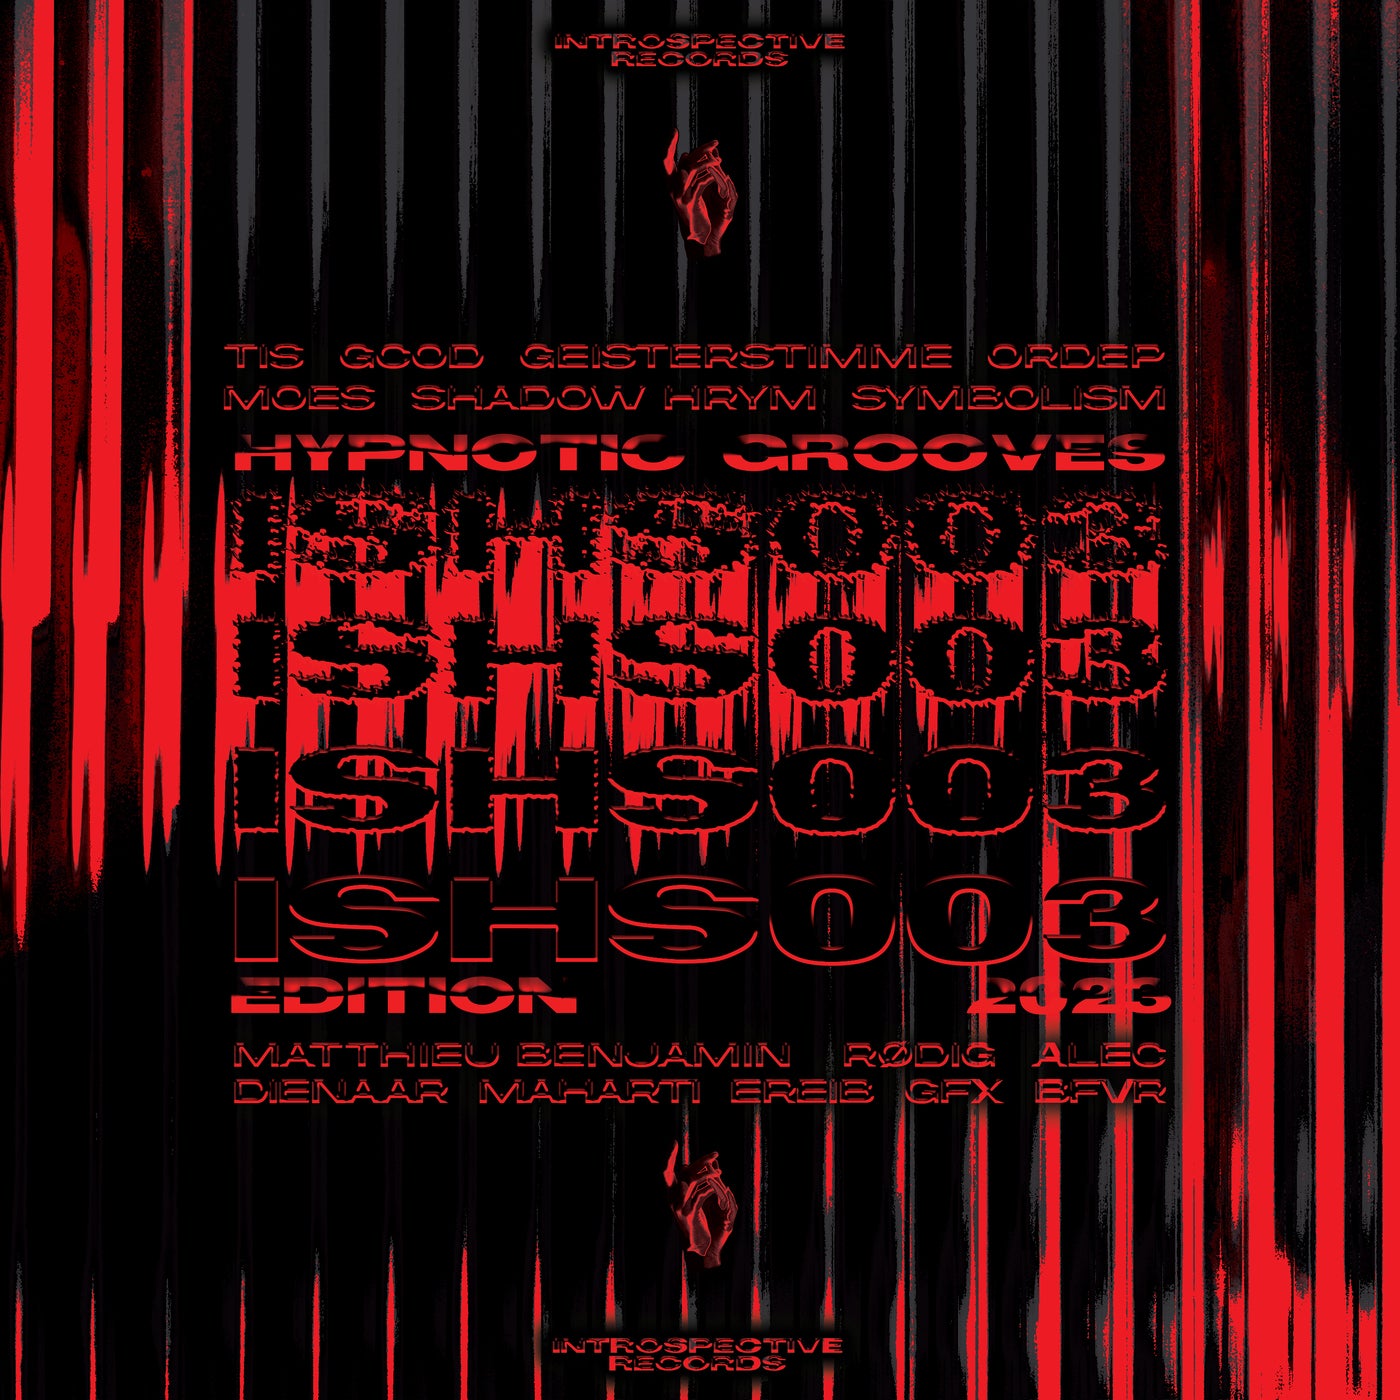 ISHS003 | Hypnotic Grooves Edition